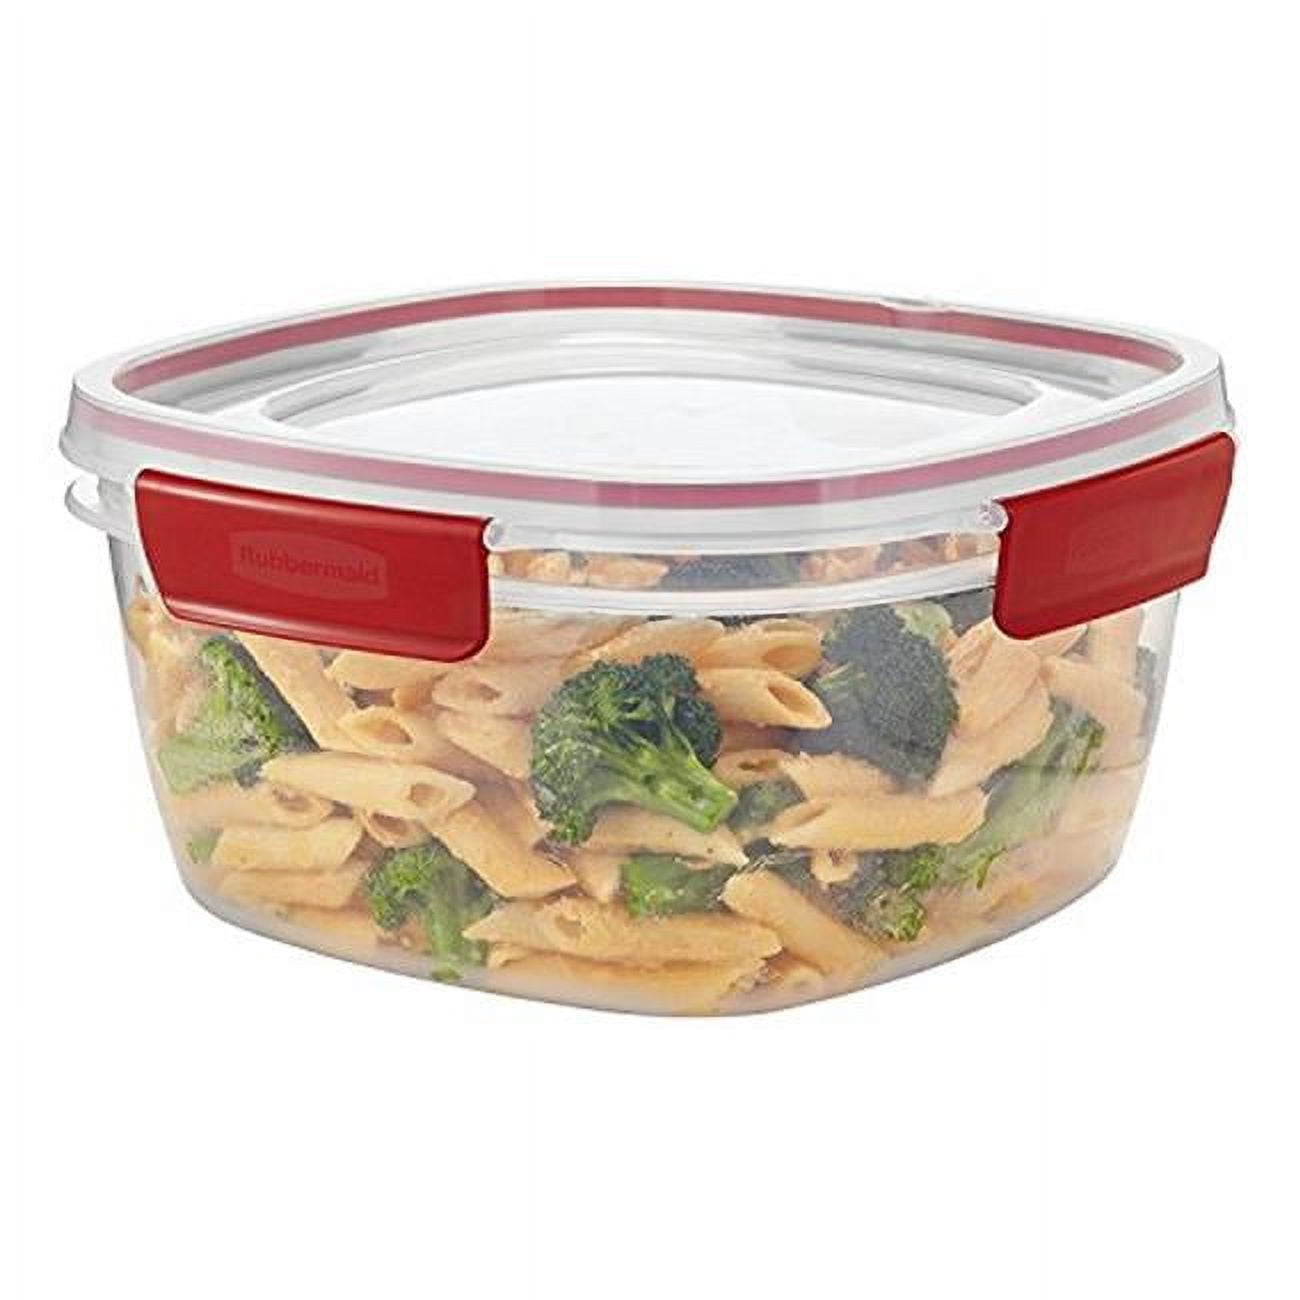 Rubbermaid®: 3 cup/710ml Container. Life Science Products